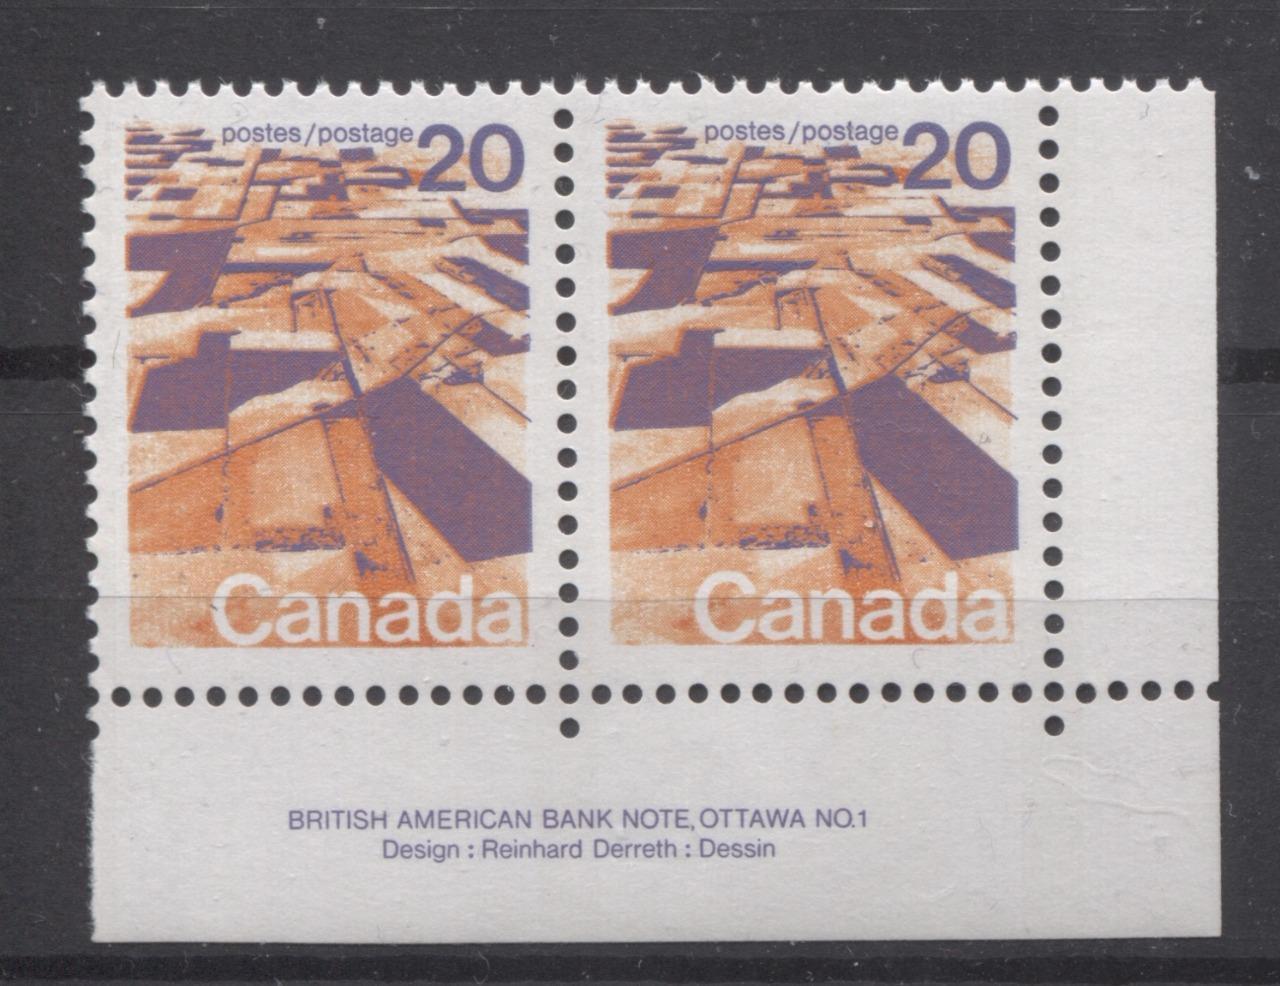 Canada #596 (SG#704) 20c Prairies 1972-1978 Caricature Issue GT-2 OP-4 Tagging Paper Type 11 Plate 1 LR Pr VF-80 NH Brixton Chrome 